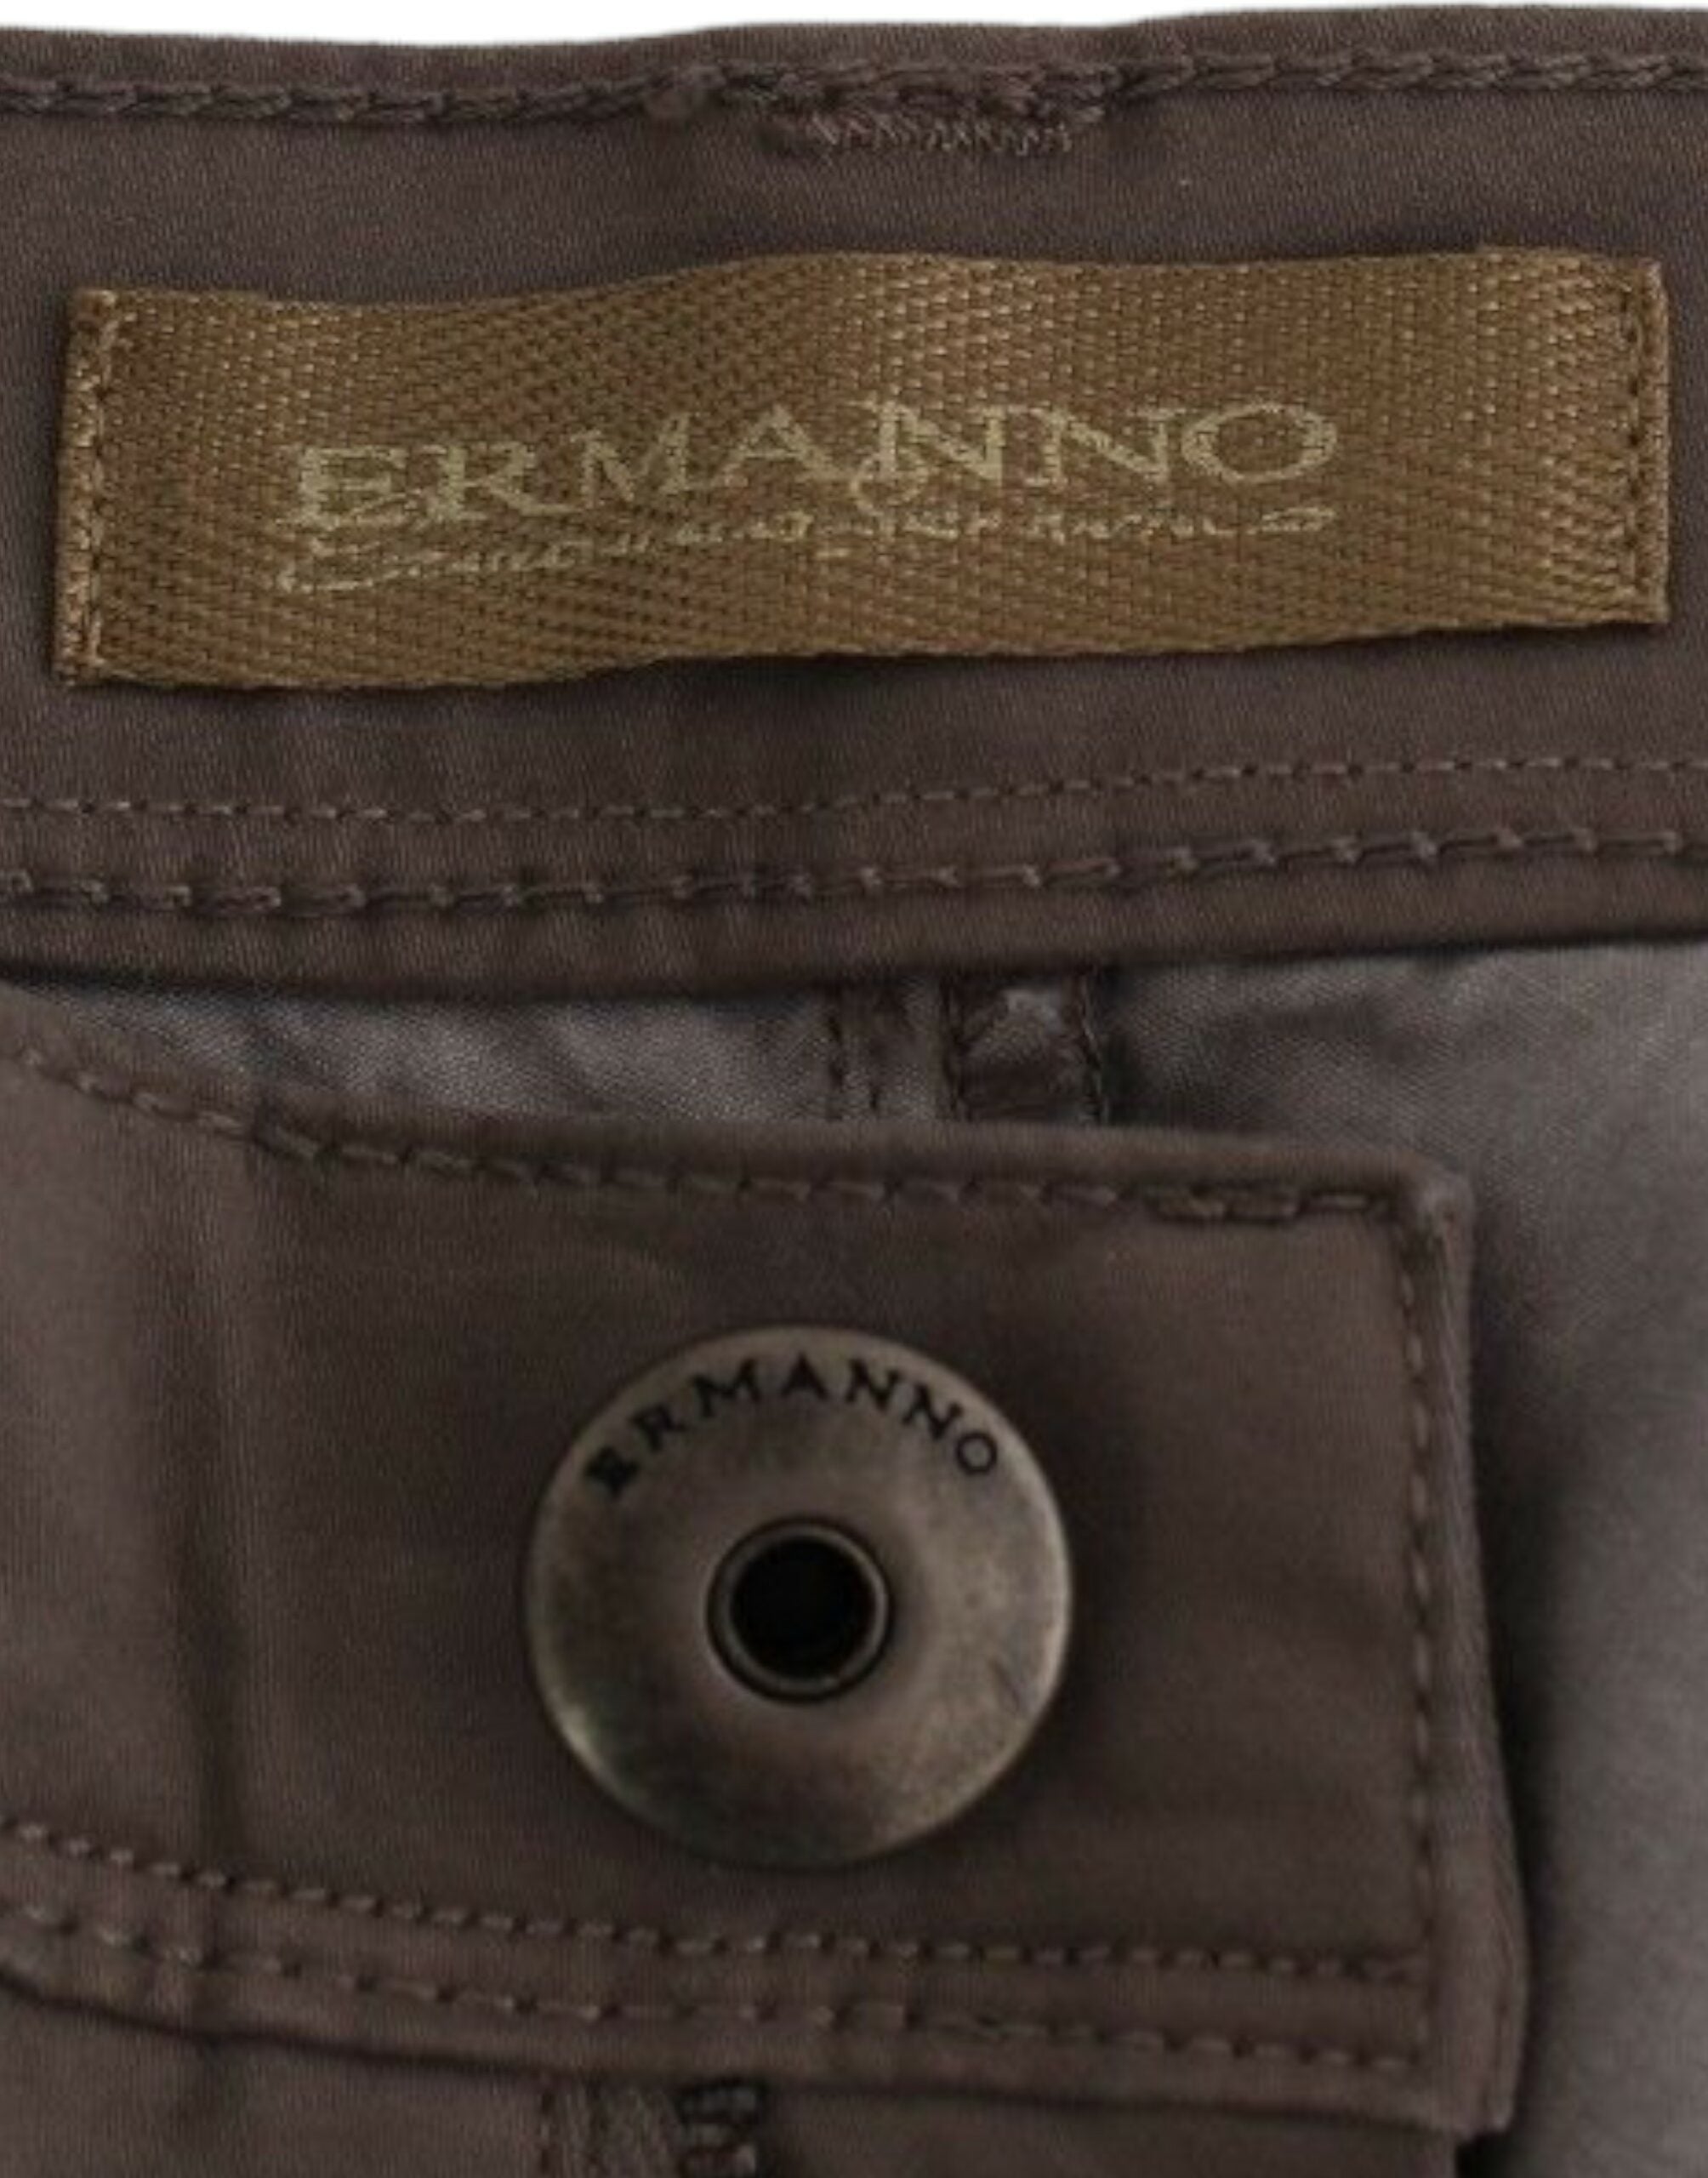 Ermanno Scervino Chic Taupe Skinny Jeans for Elevated Style